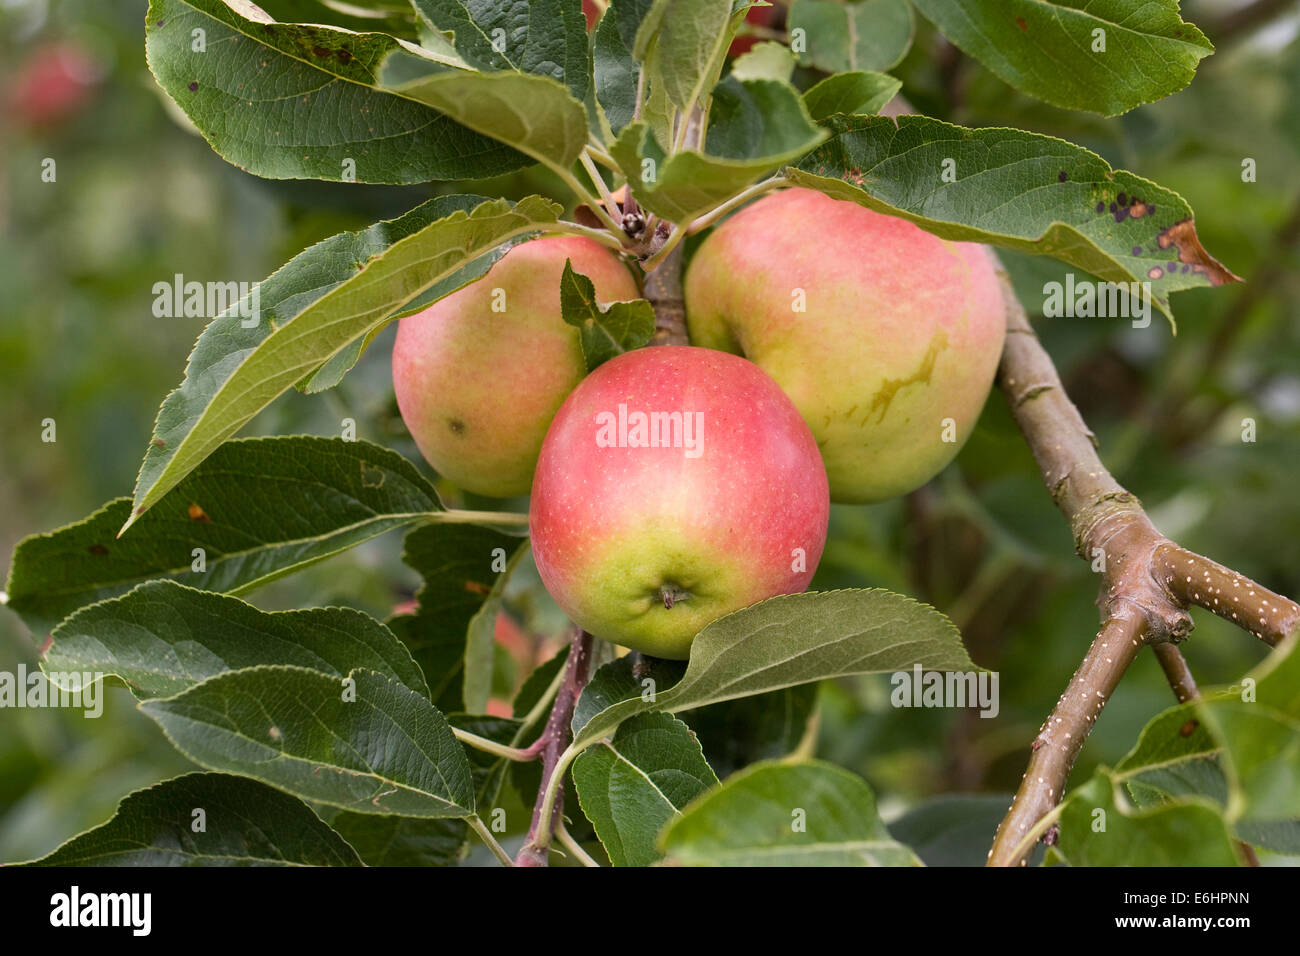 Malus domestica 'Akane'. Apples growing in an English orchard. Stock Photo